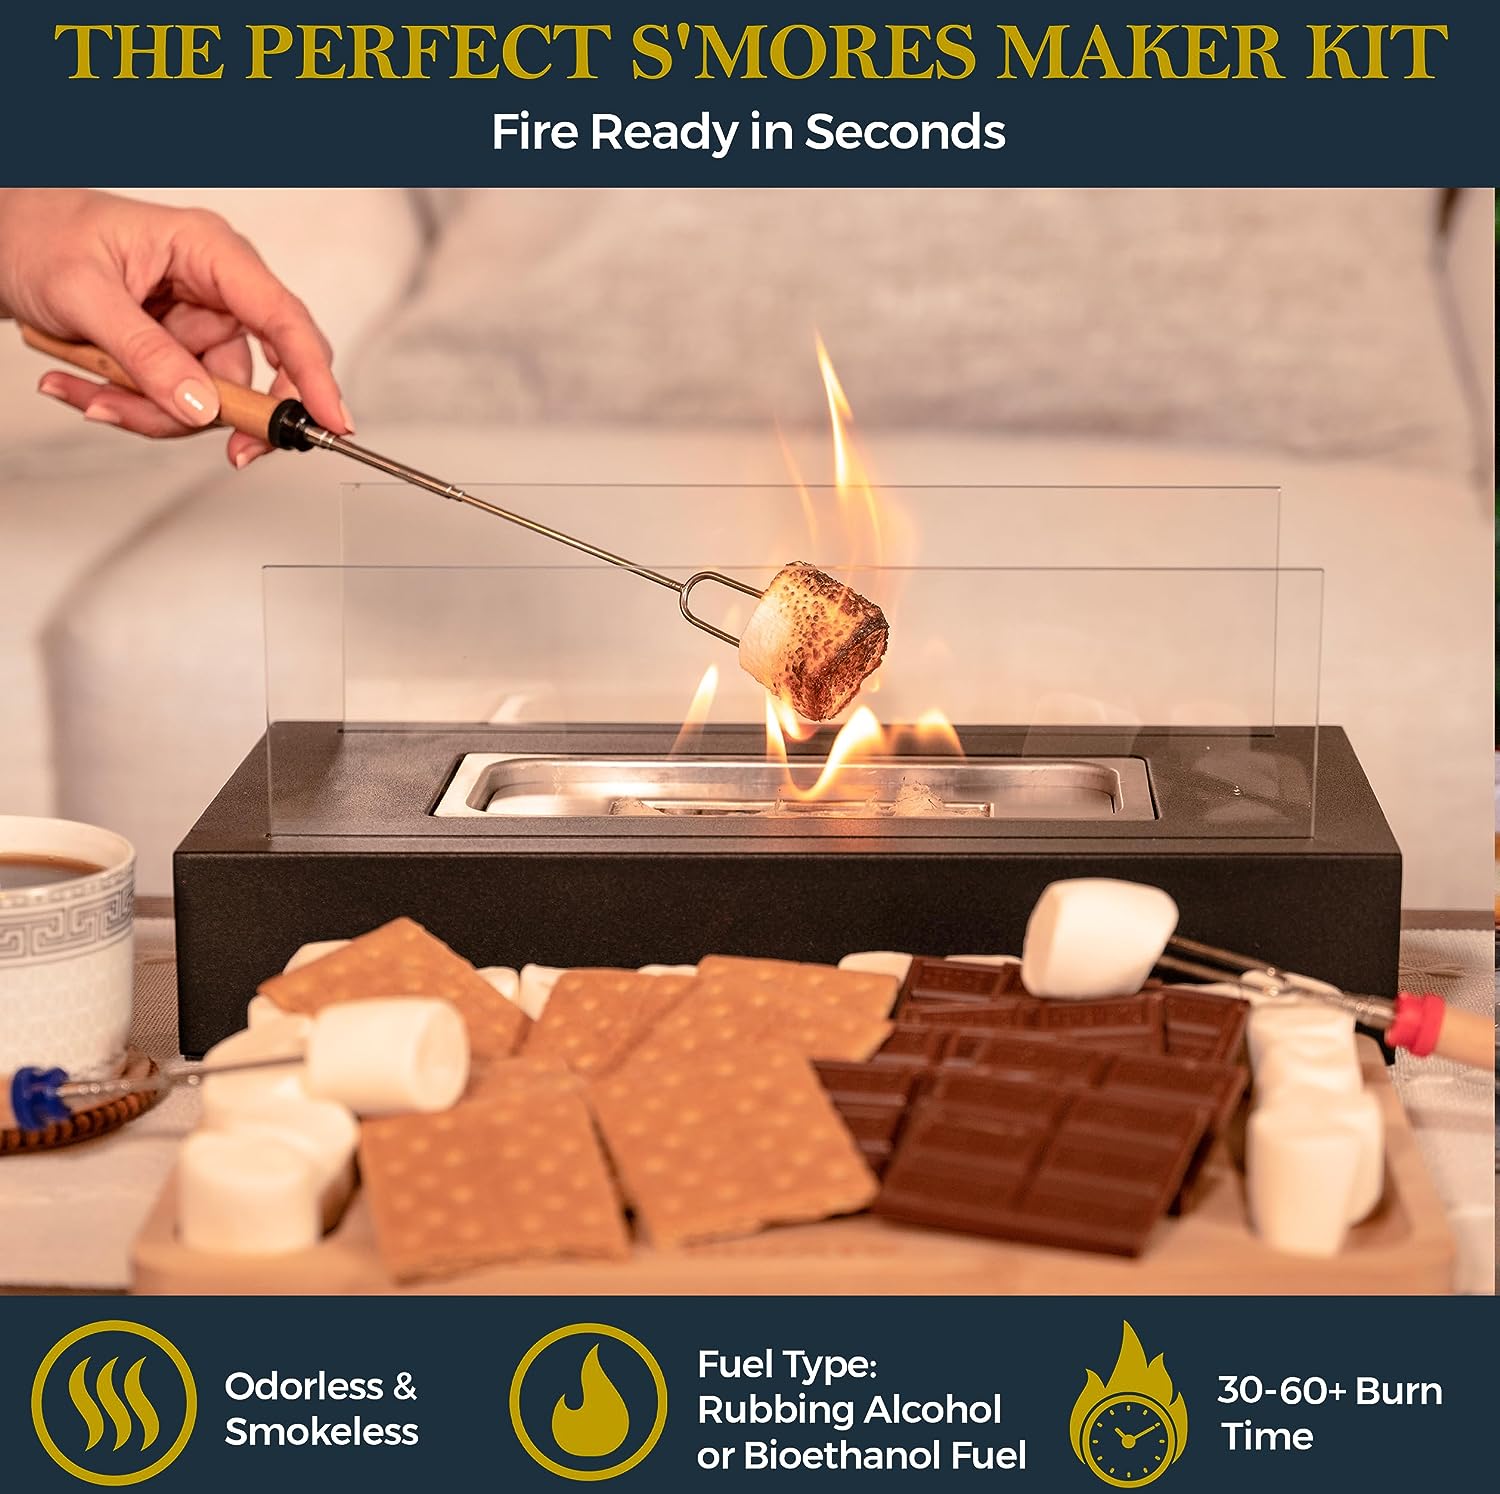 ROZATO Tabletop Fire Pit with Smores Maker Kit Portable Indoor/Outdoor Mini Small Fireplace Bowl Table Top Decor Home Patio Balcony Backyard Gifts for Women Mom Her Wedding Housewarming Birthday Gift